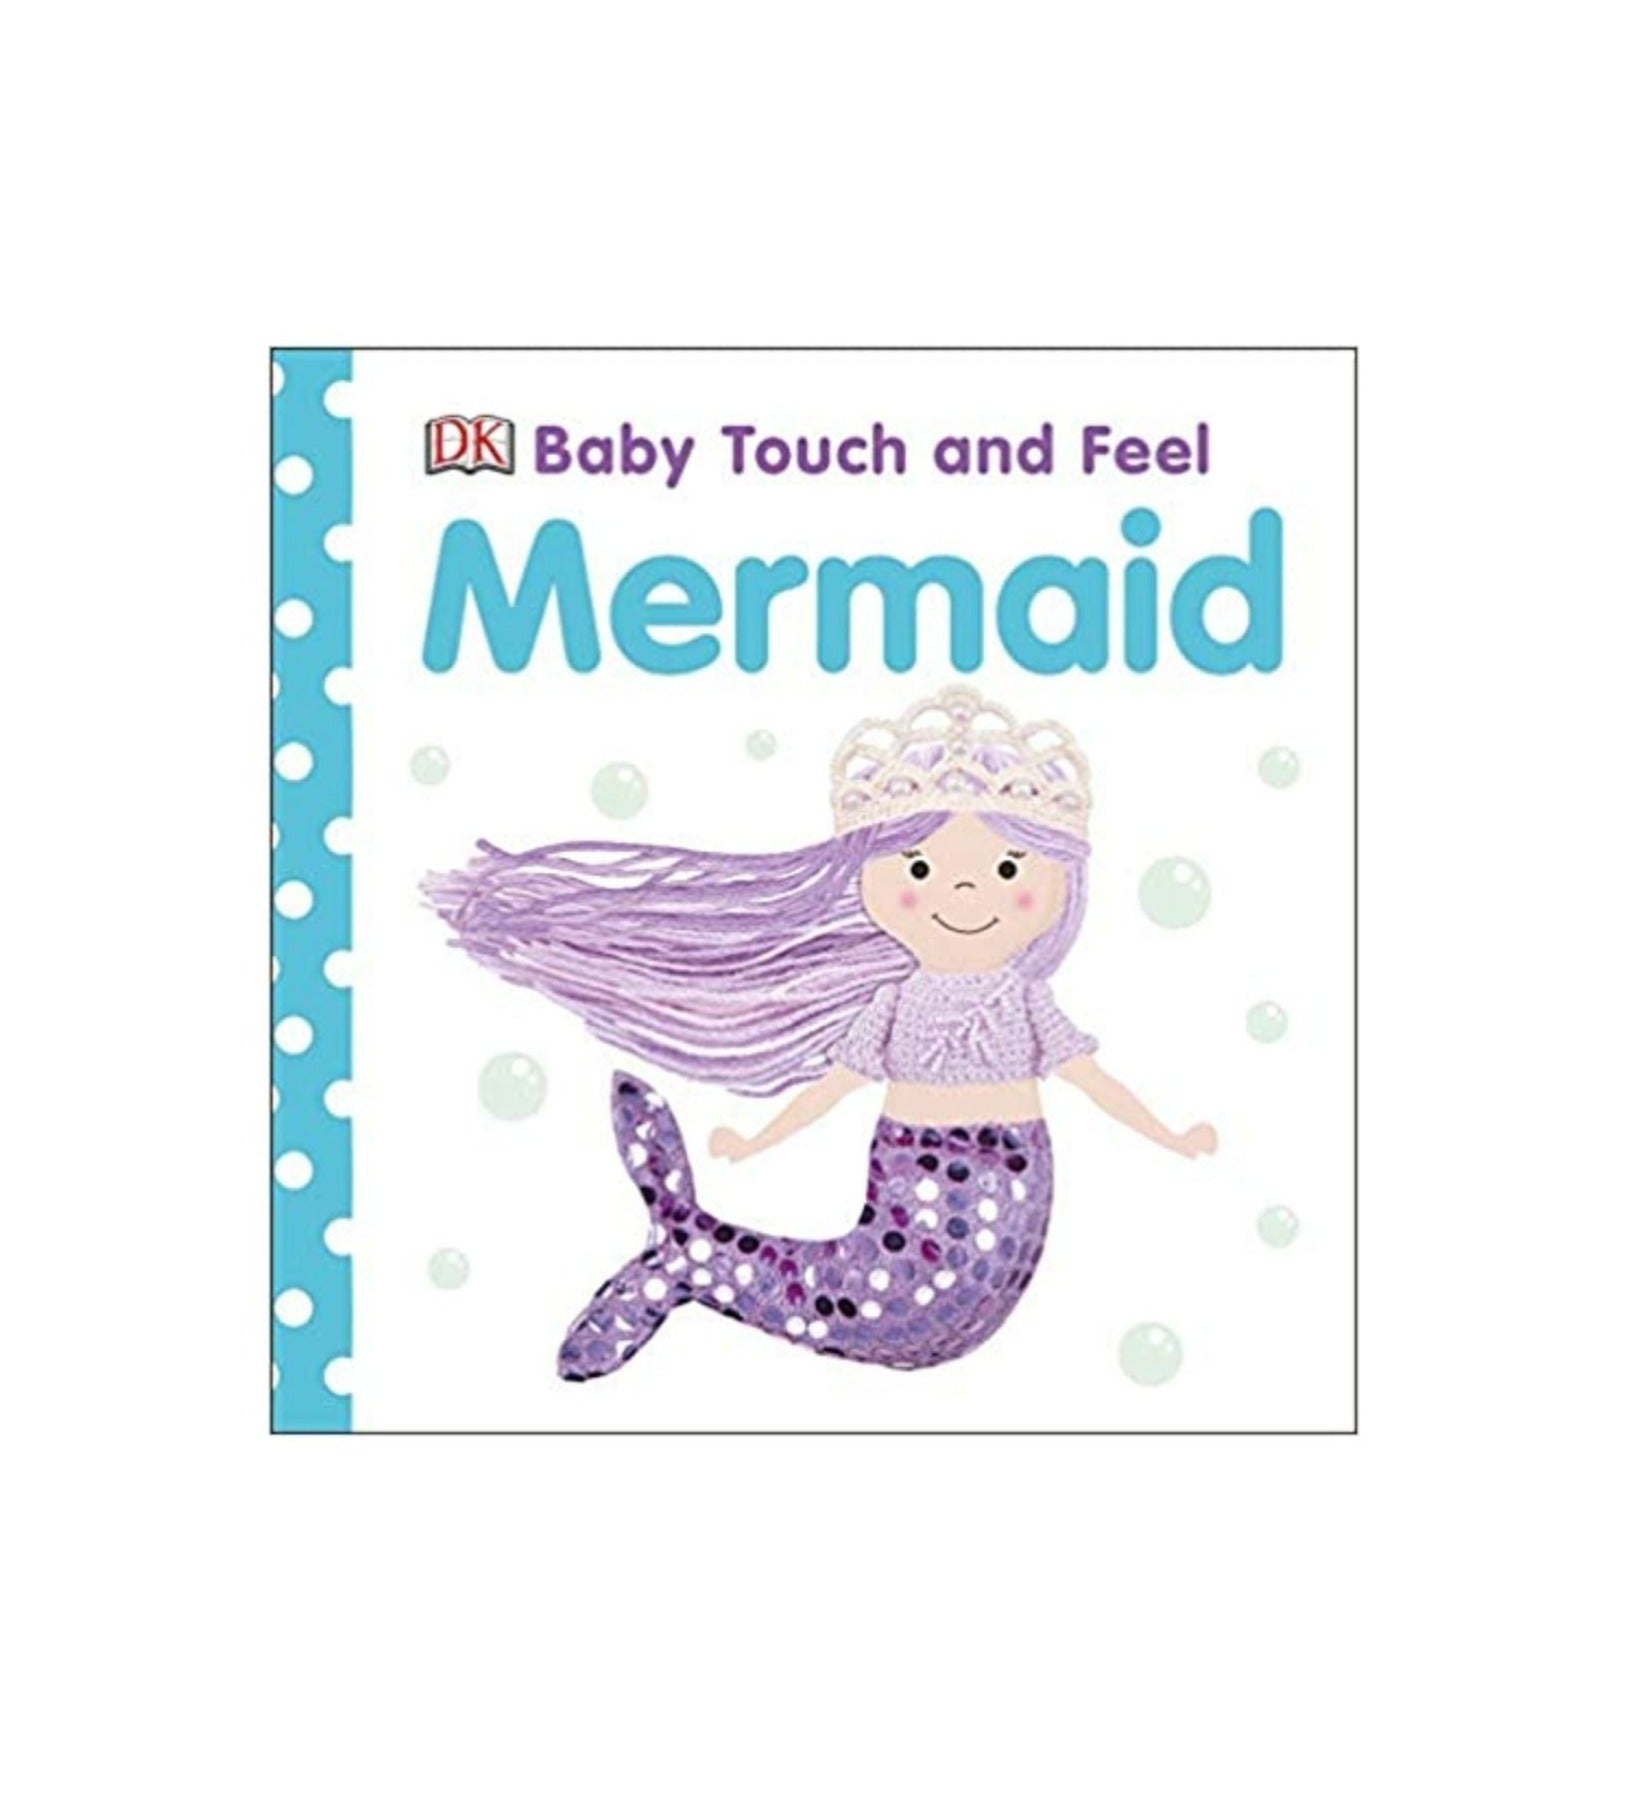 cover shows mermaid with purple hair and tail